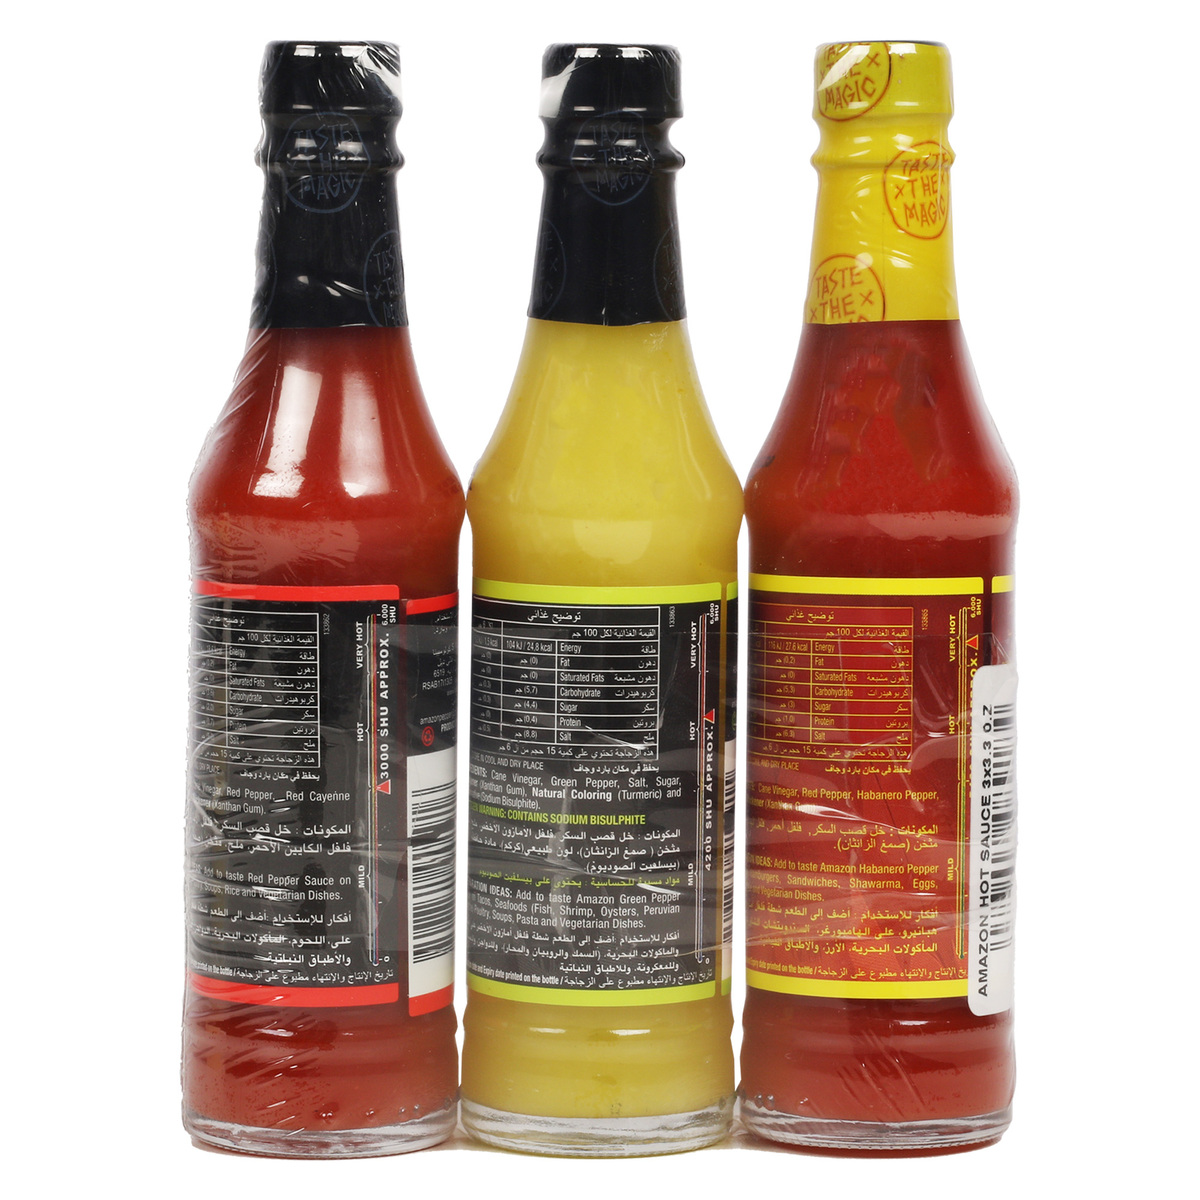 Amazon Hot Sauce Assorted Value Pack 3 x 3.3oz